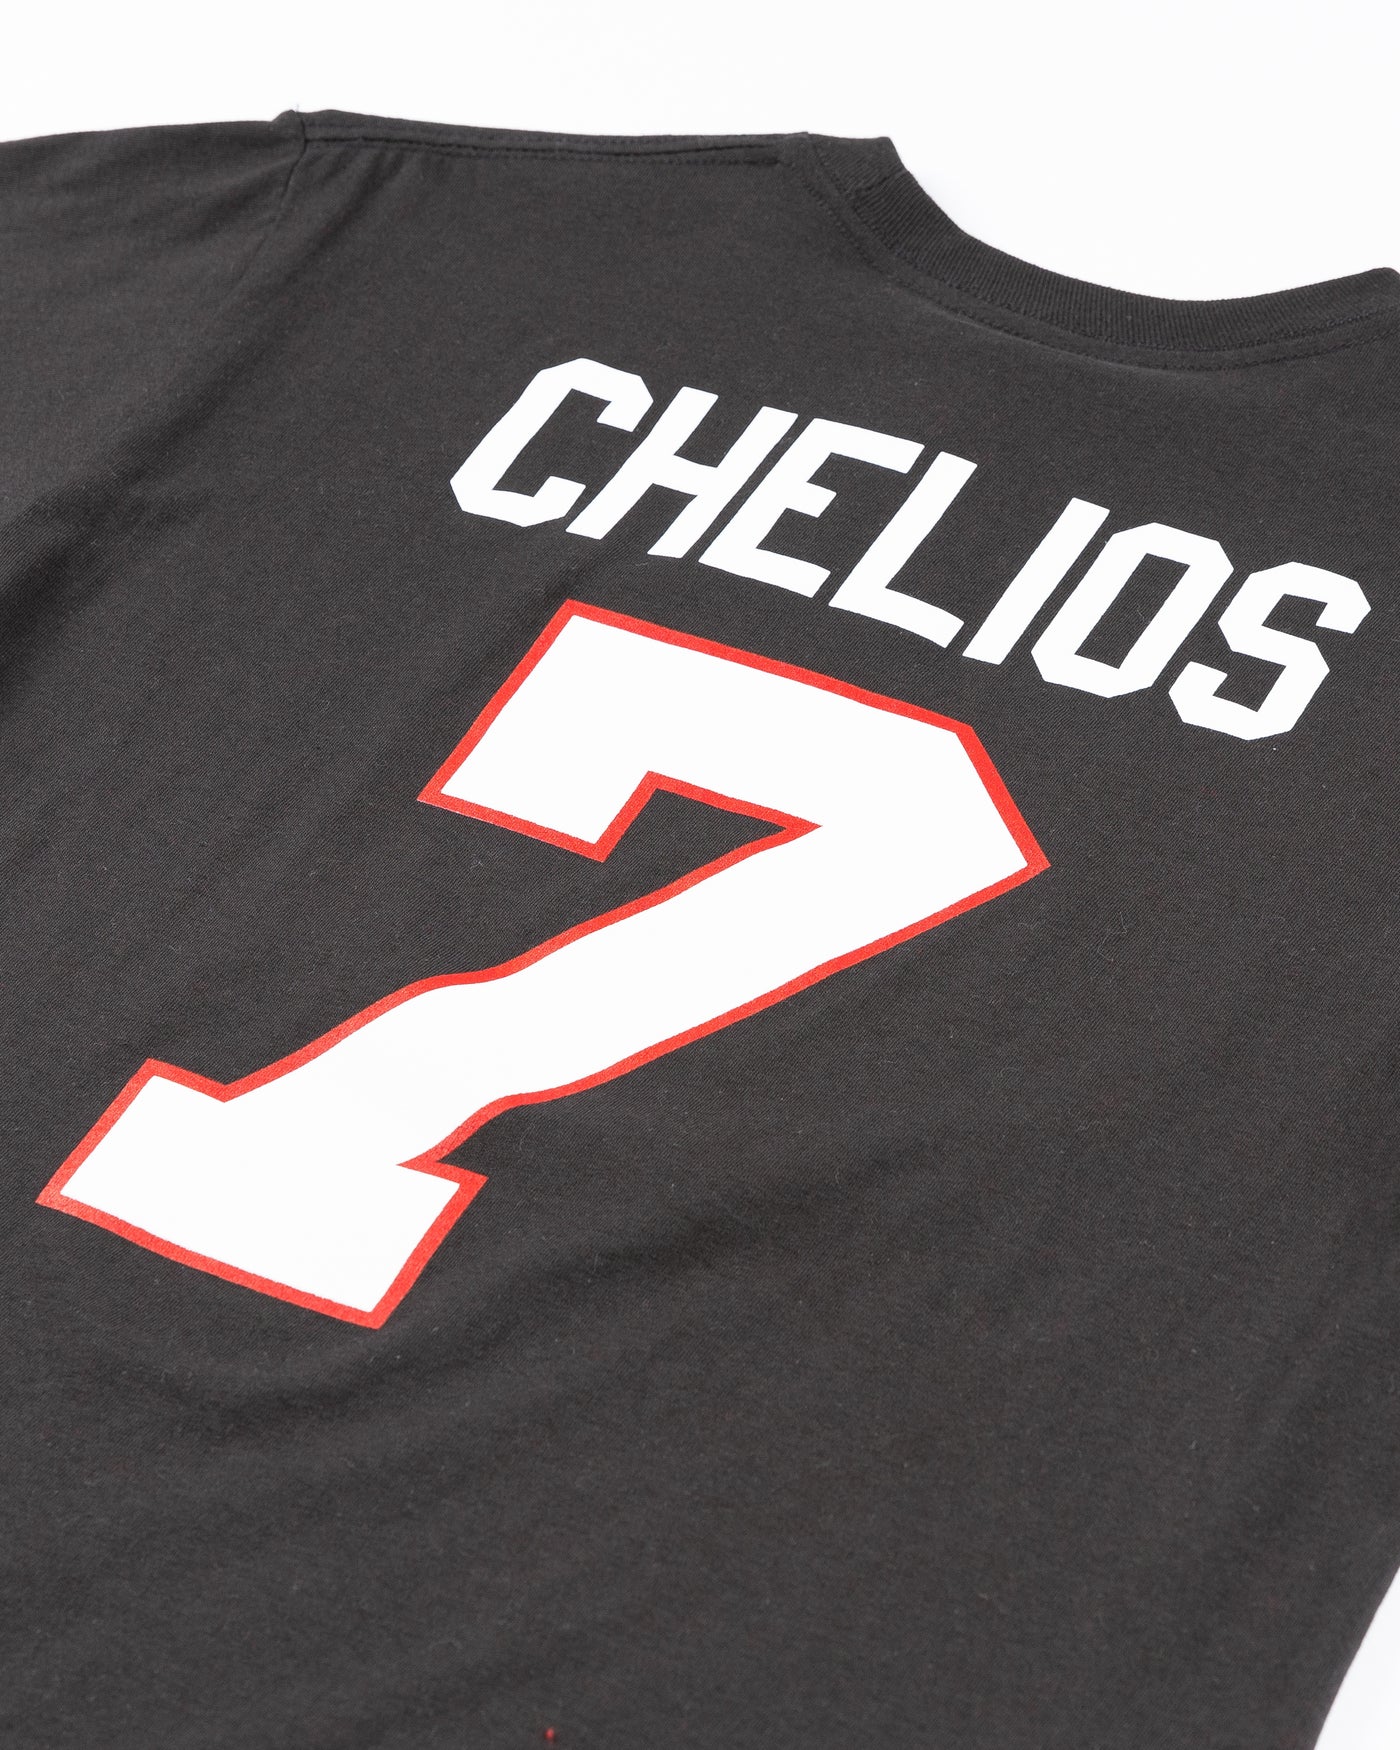 black Mitchell & Ness youth player tee of Chris Chelios inspired by vintage jersesy - back detail lay flat